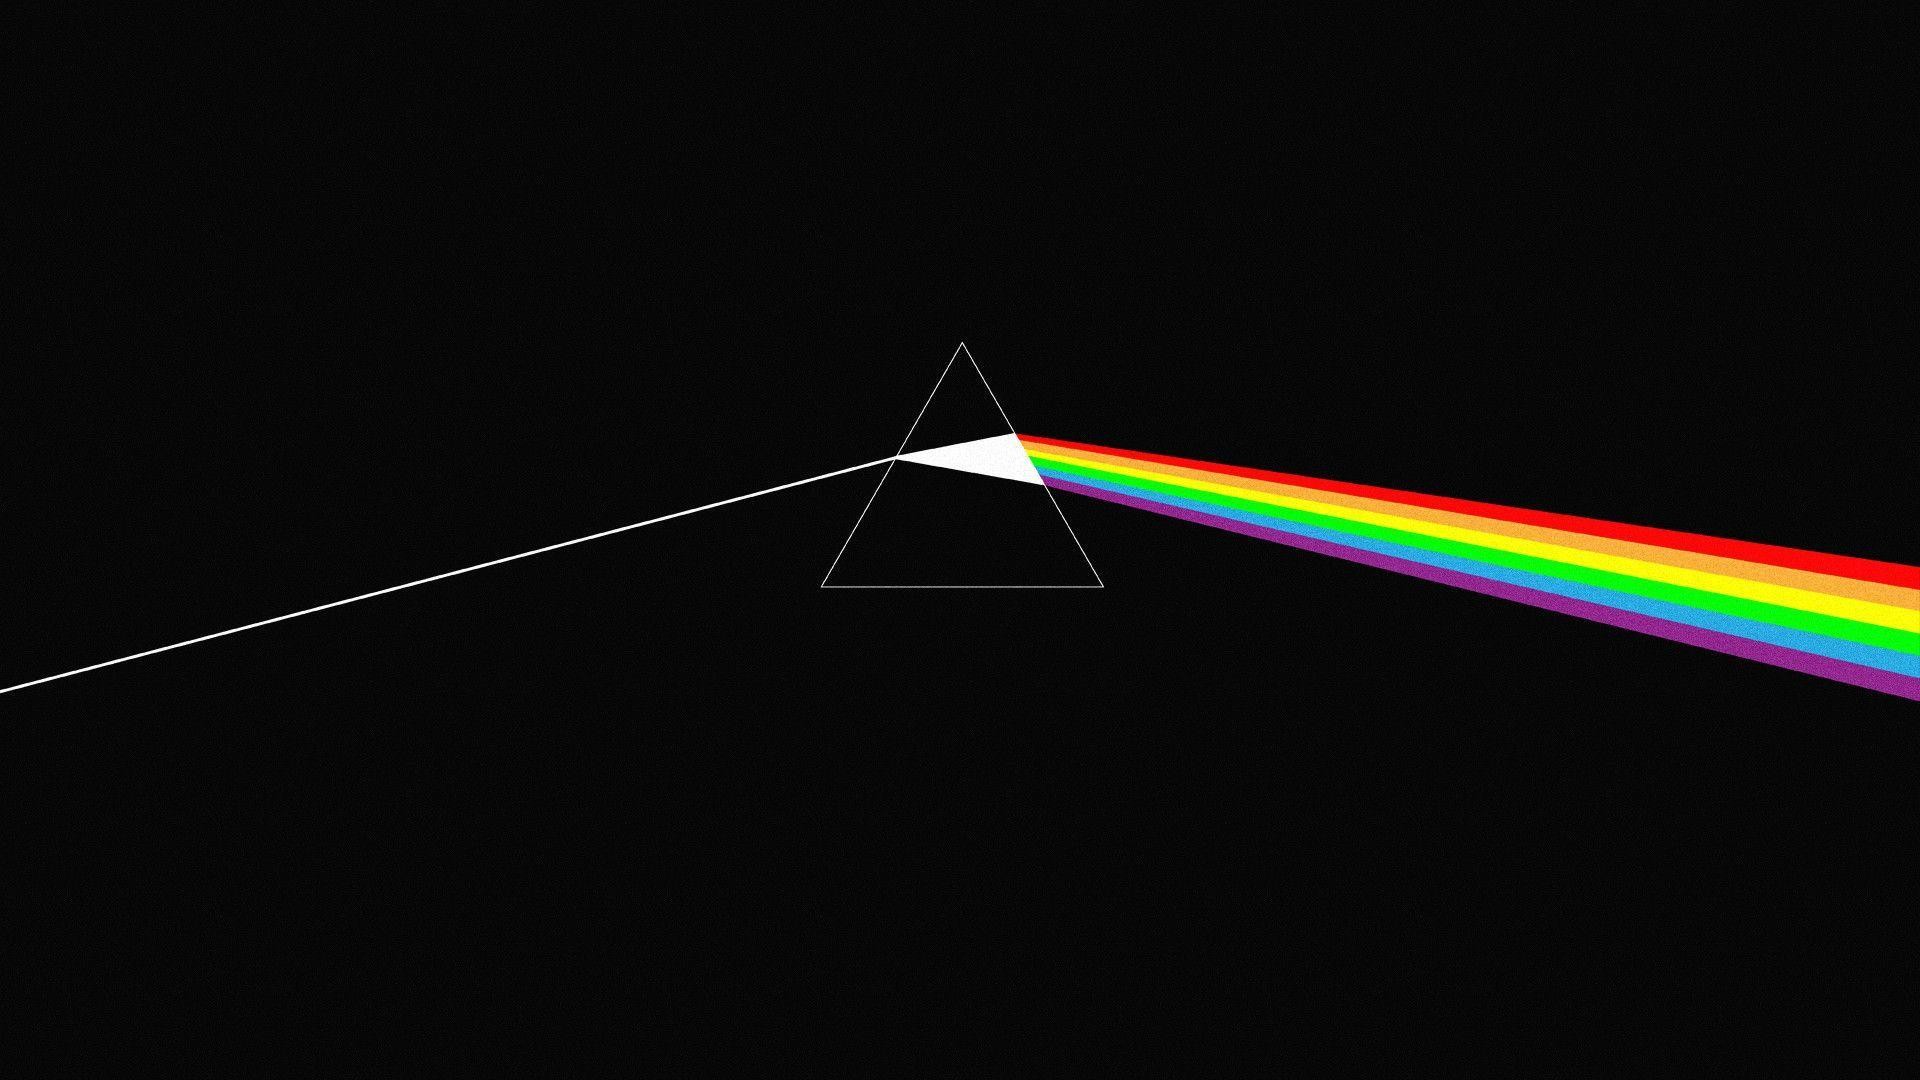 Music  Pink Floyd Wallpapers and Backgrounds ID  312777  Pink floyd  wallpaper Pink floyd art Pink floyd